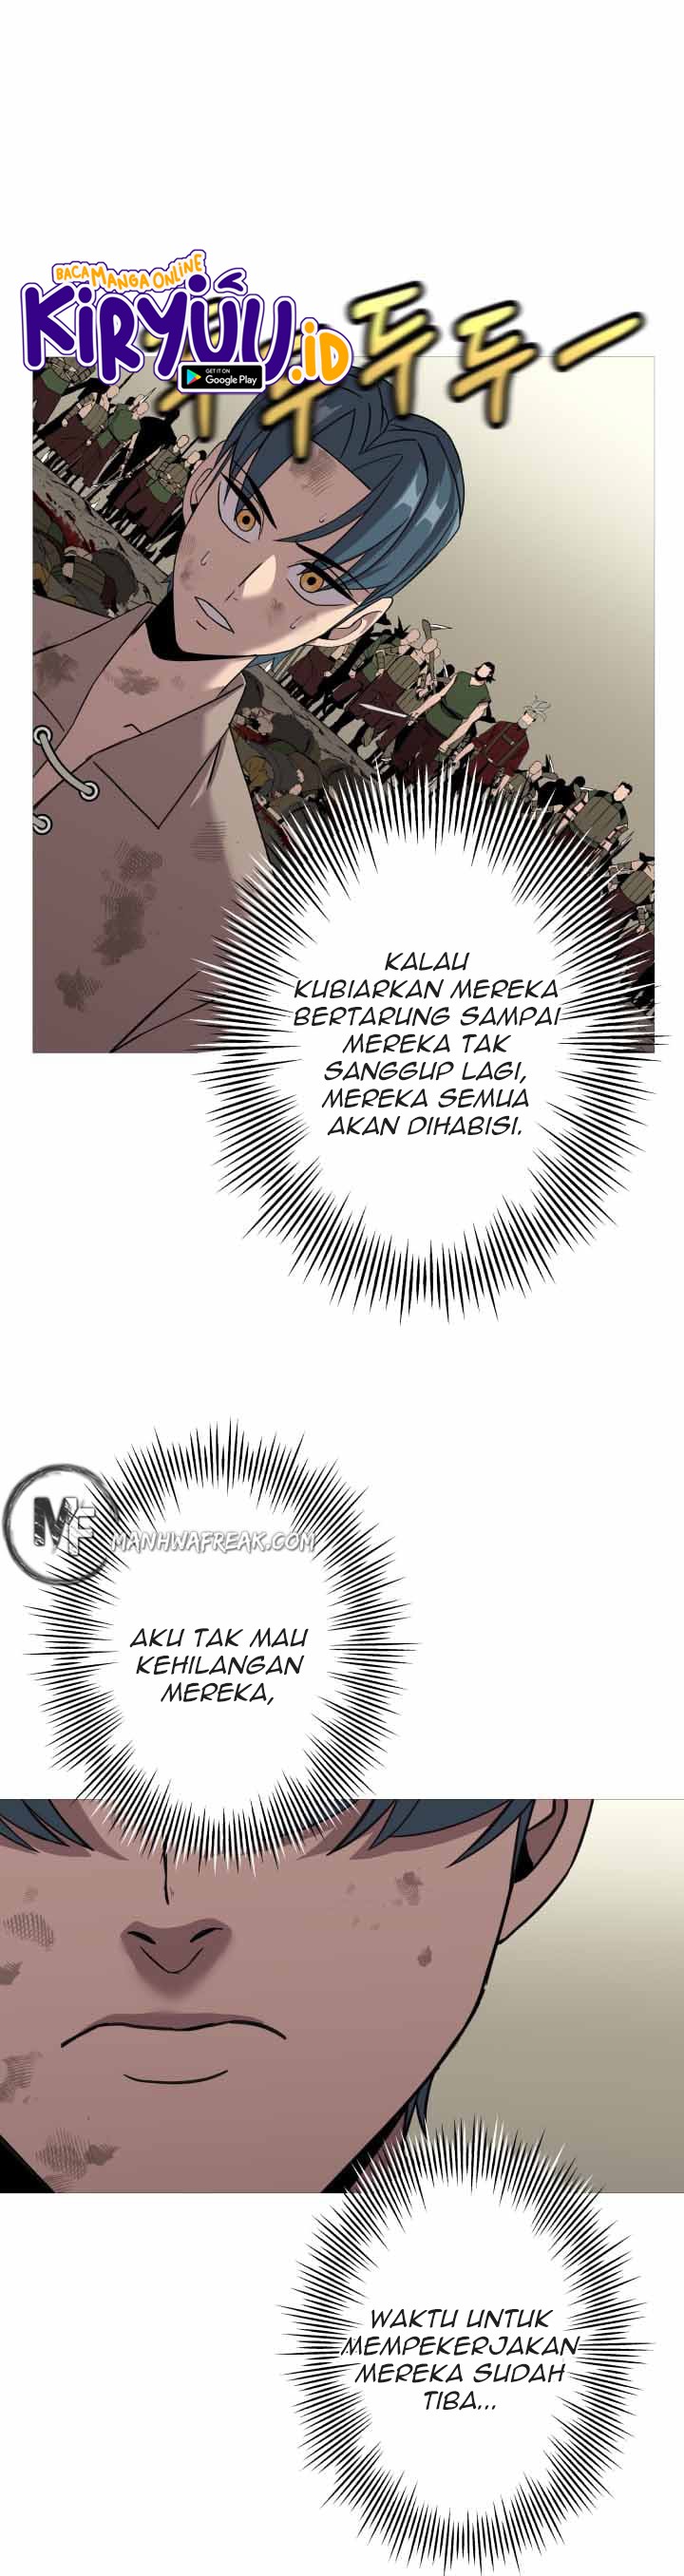 Dilarang COPAS - situs resmi www.mangacanblog.com - Komik the story of a low rank soldier becoming a monarch 069 - chapter 69 70 Indonesia the story of a low rank soldier becoming a monarch 069 - chapter 69 Terbaru 28|Baca Manga Komik Indonesia|Mangacan